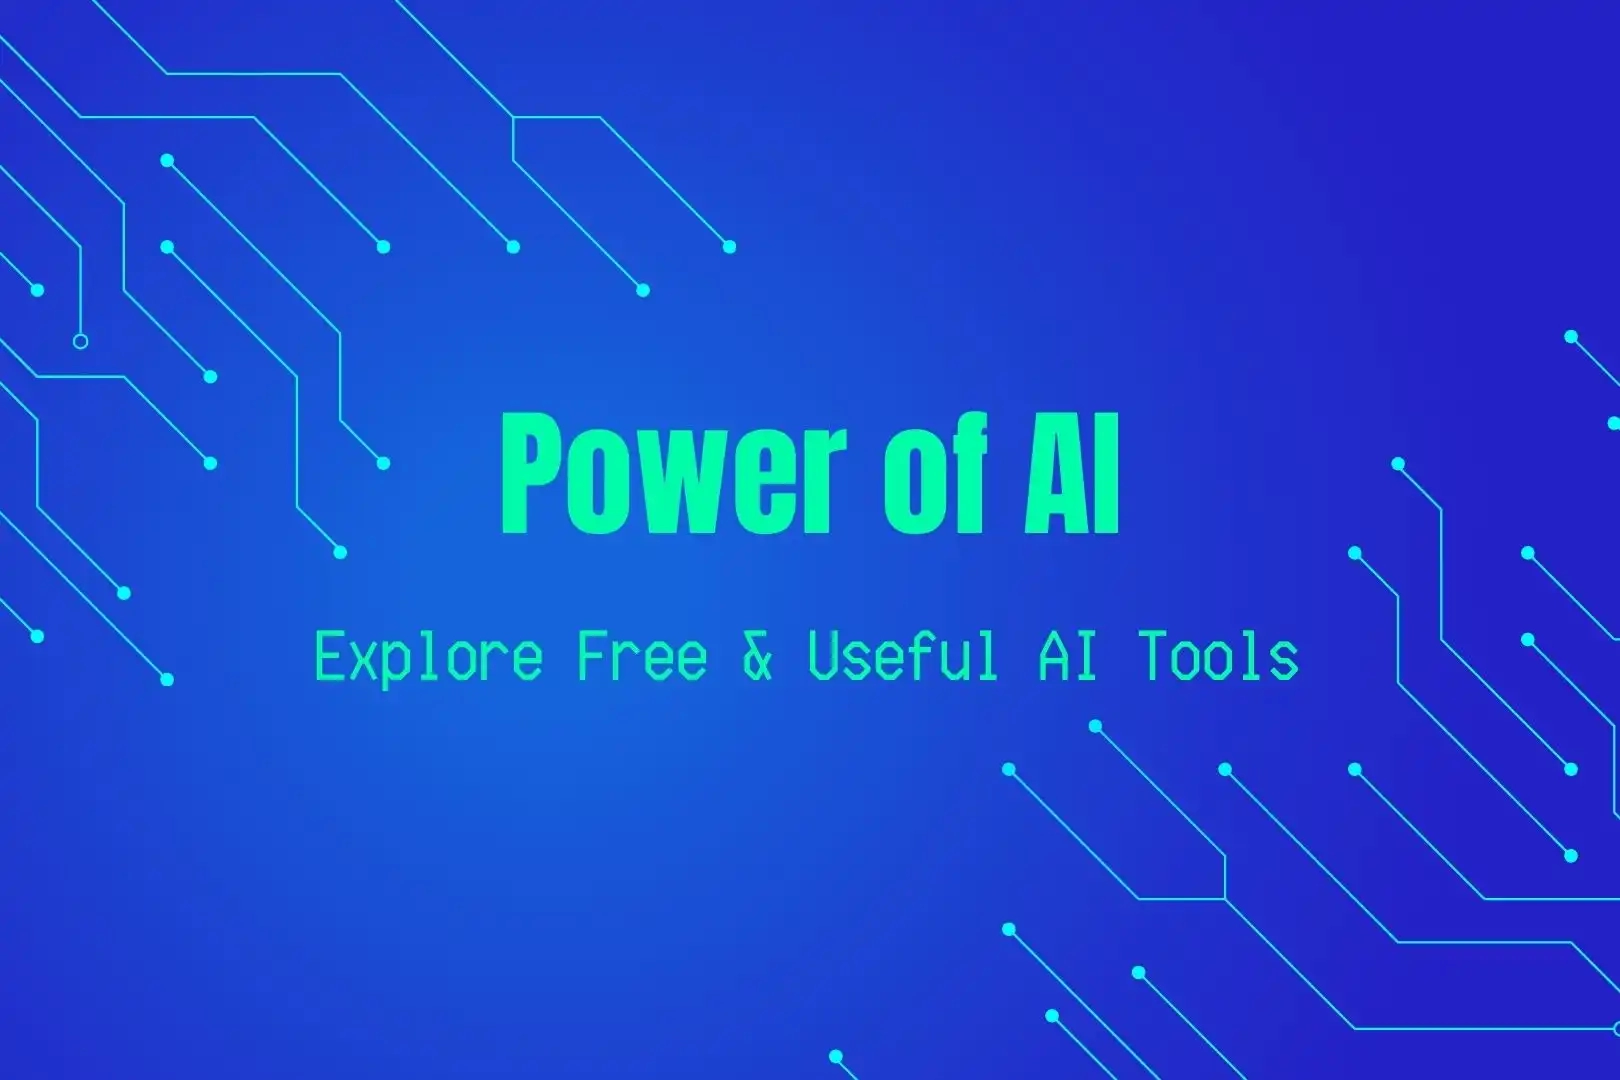 Power of AI: Explore Free and Useful Artificial Intelligence Tools